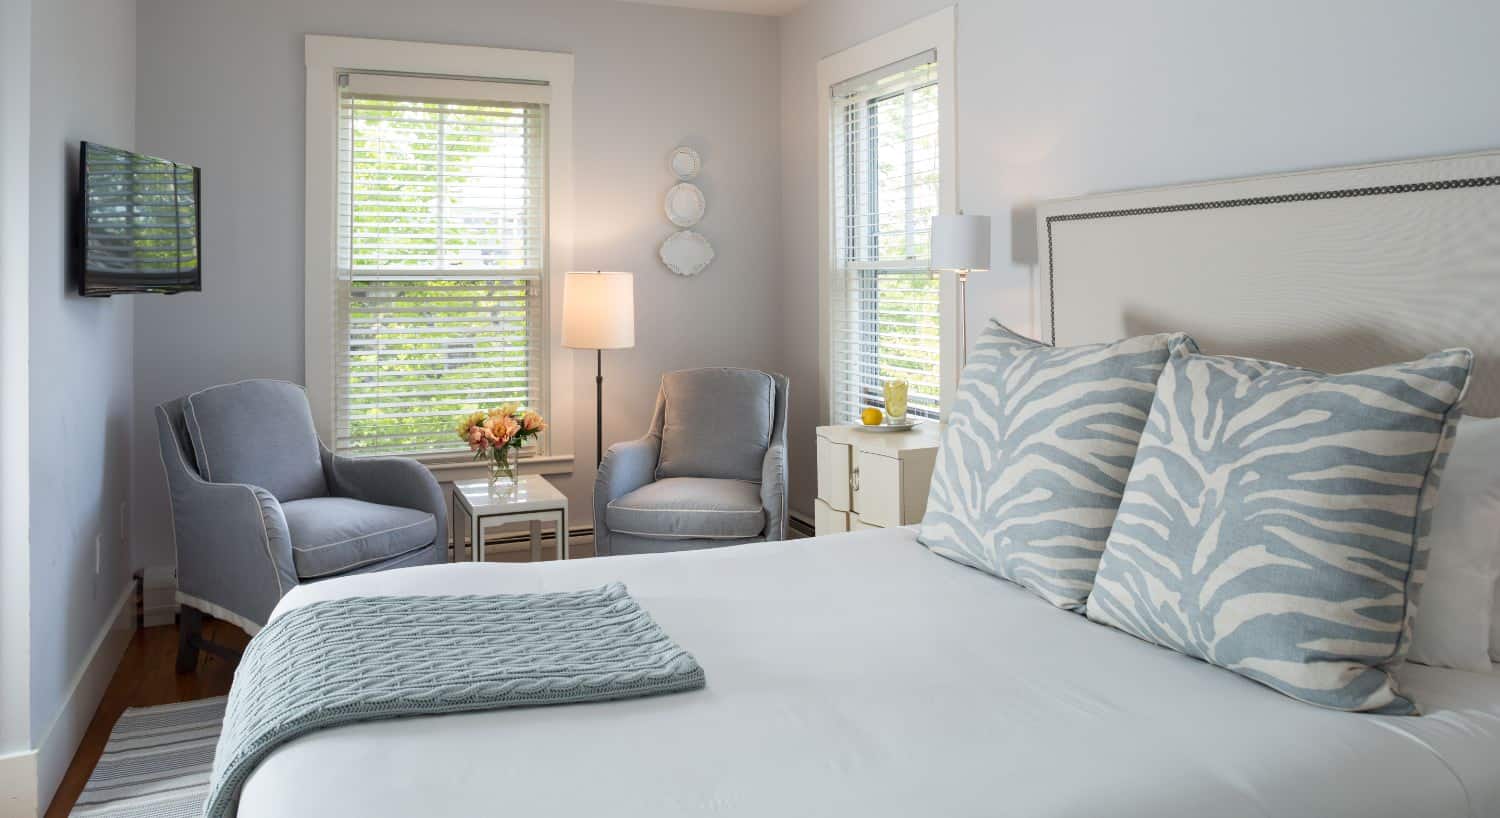 Bedroom with wooden flooring, light blue walls, white bedding, and two light blue upholstered chairs